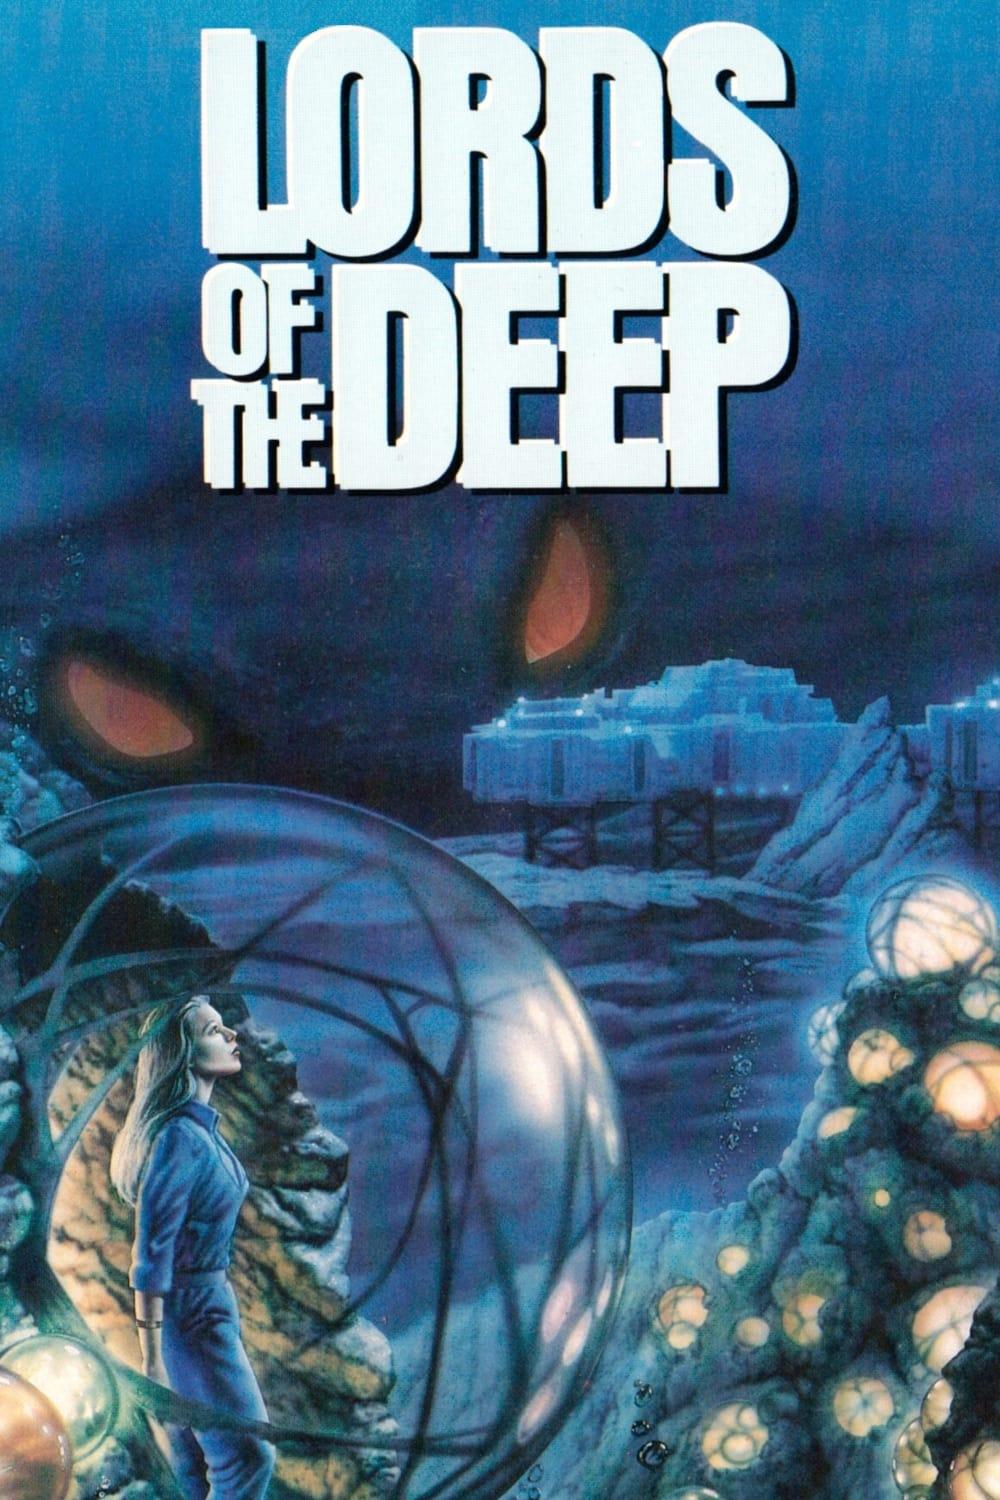 Lords of the Deep poster